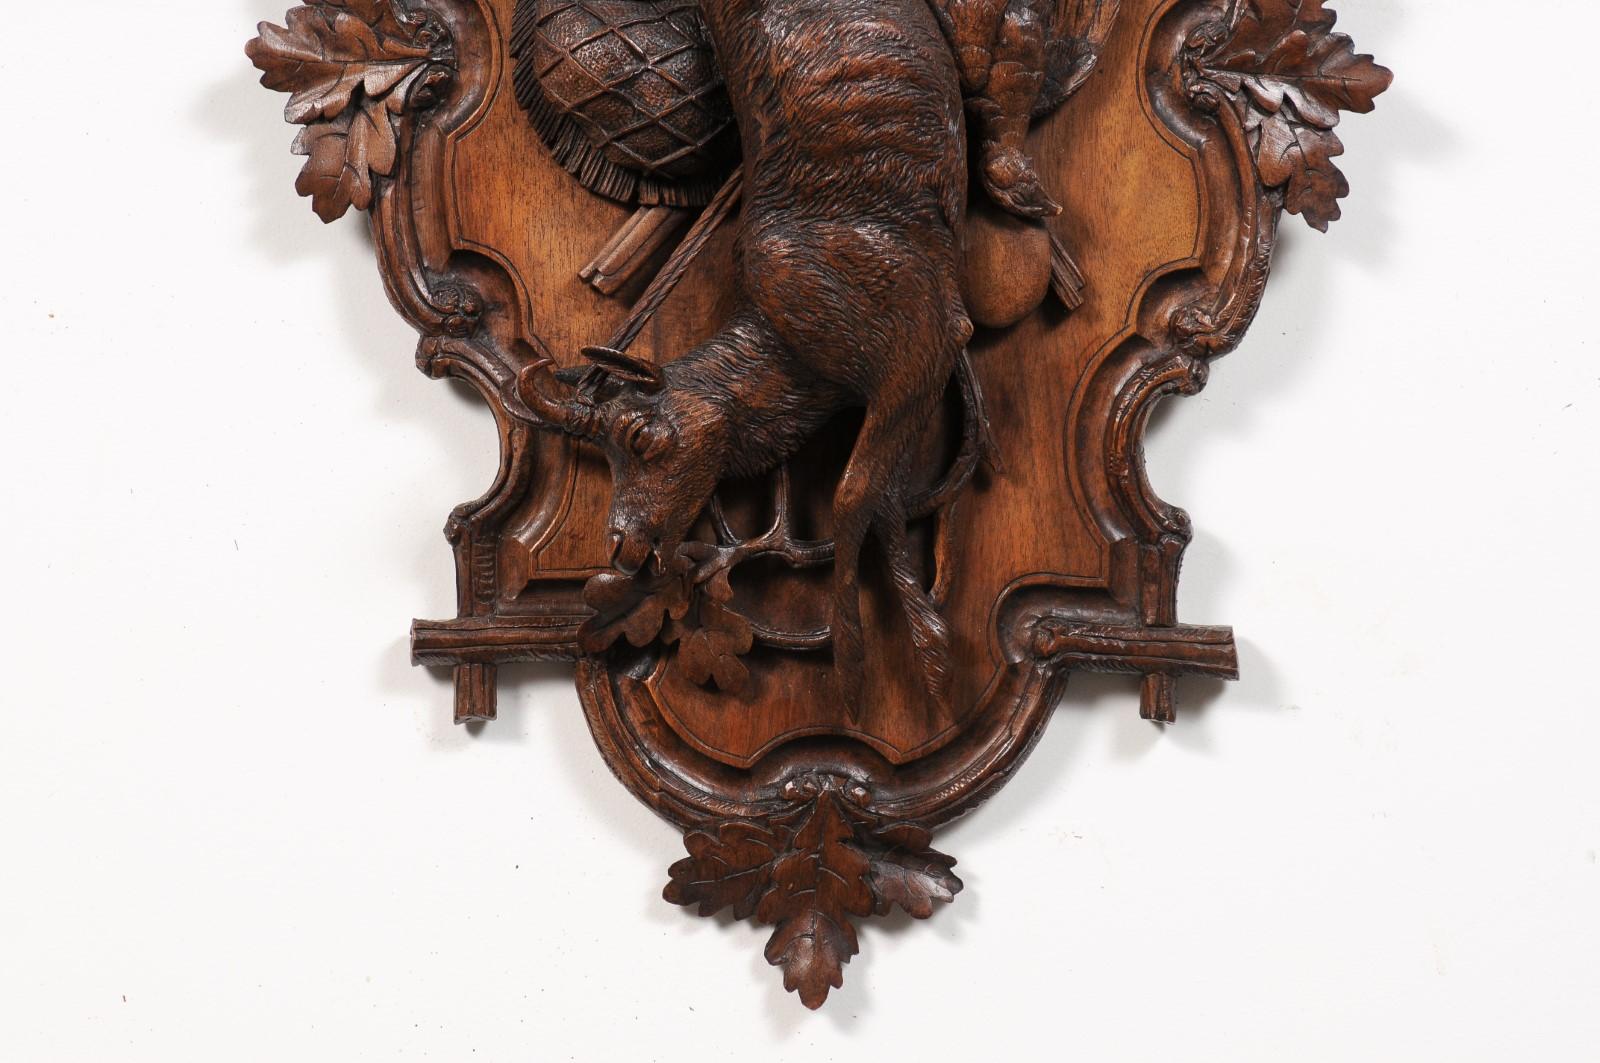 Black Forest Period 19th Century German Oak Wall Carving with Hunting Trophy For Sale 1